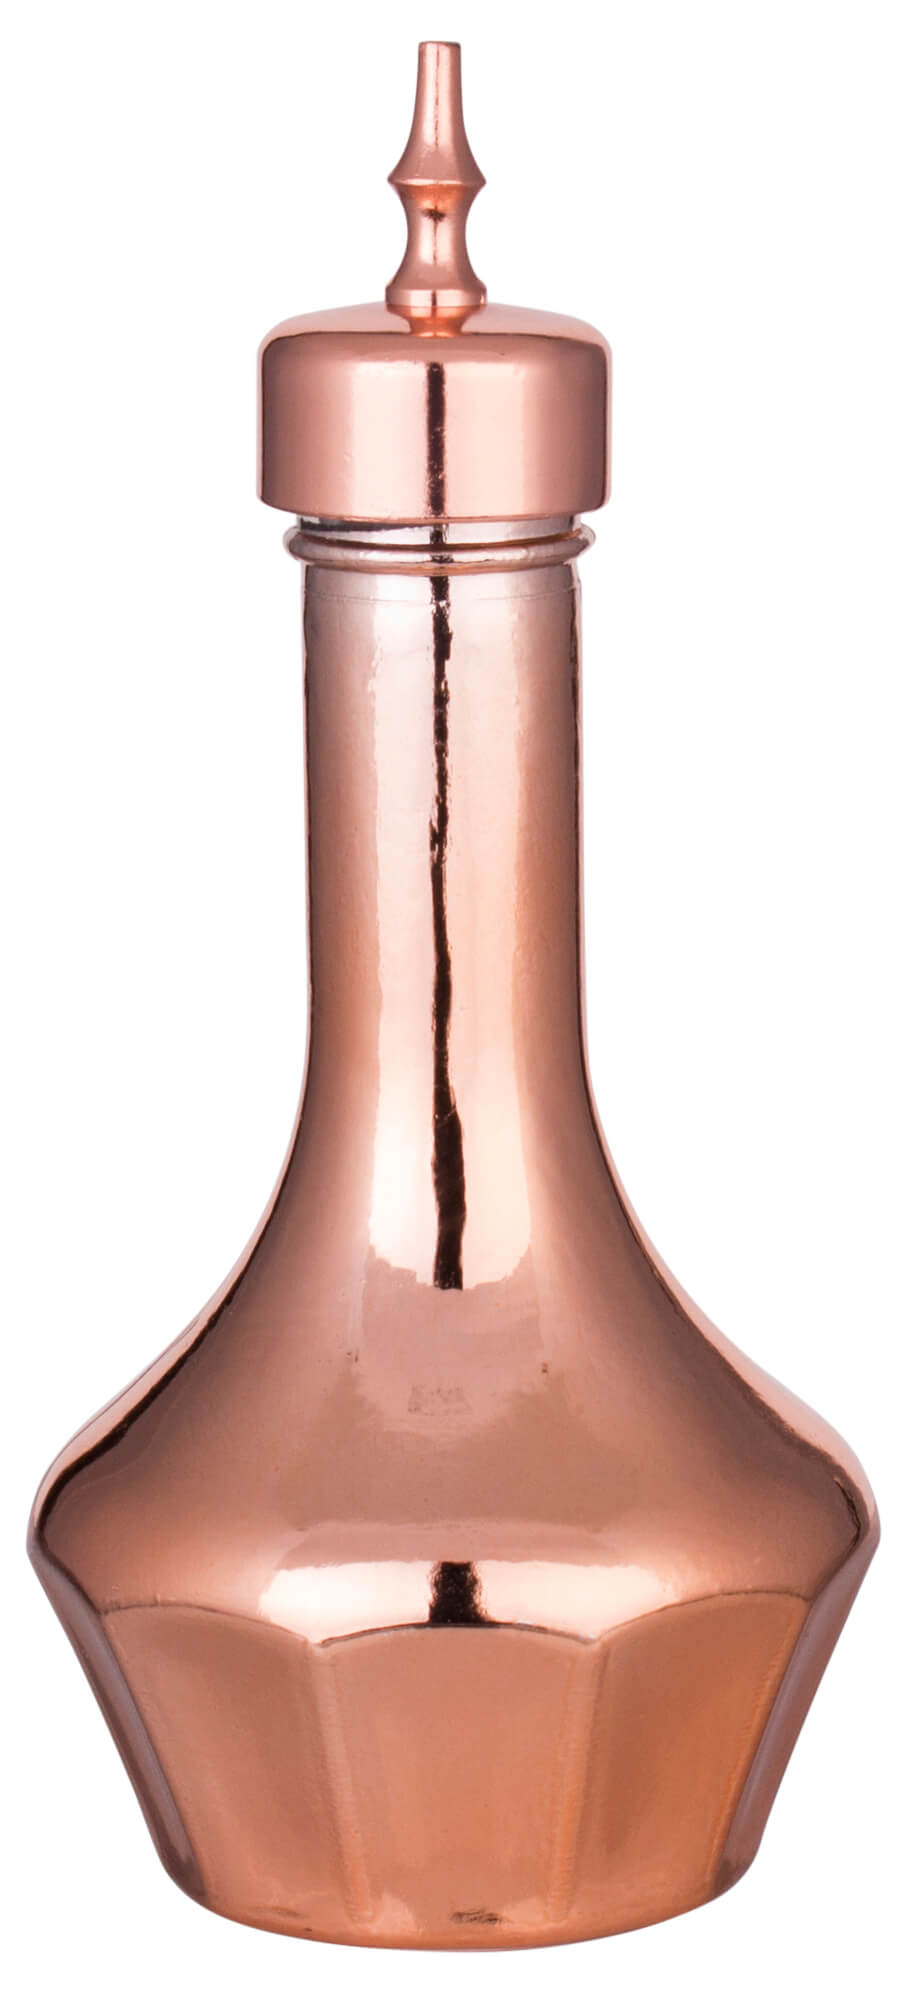 Bitters bottle Japan style, Prime Bar, copper-colored - 50ml